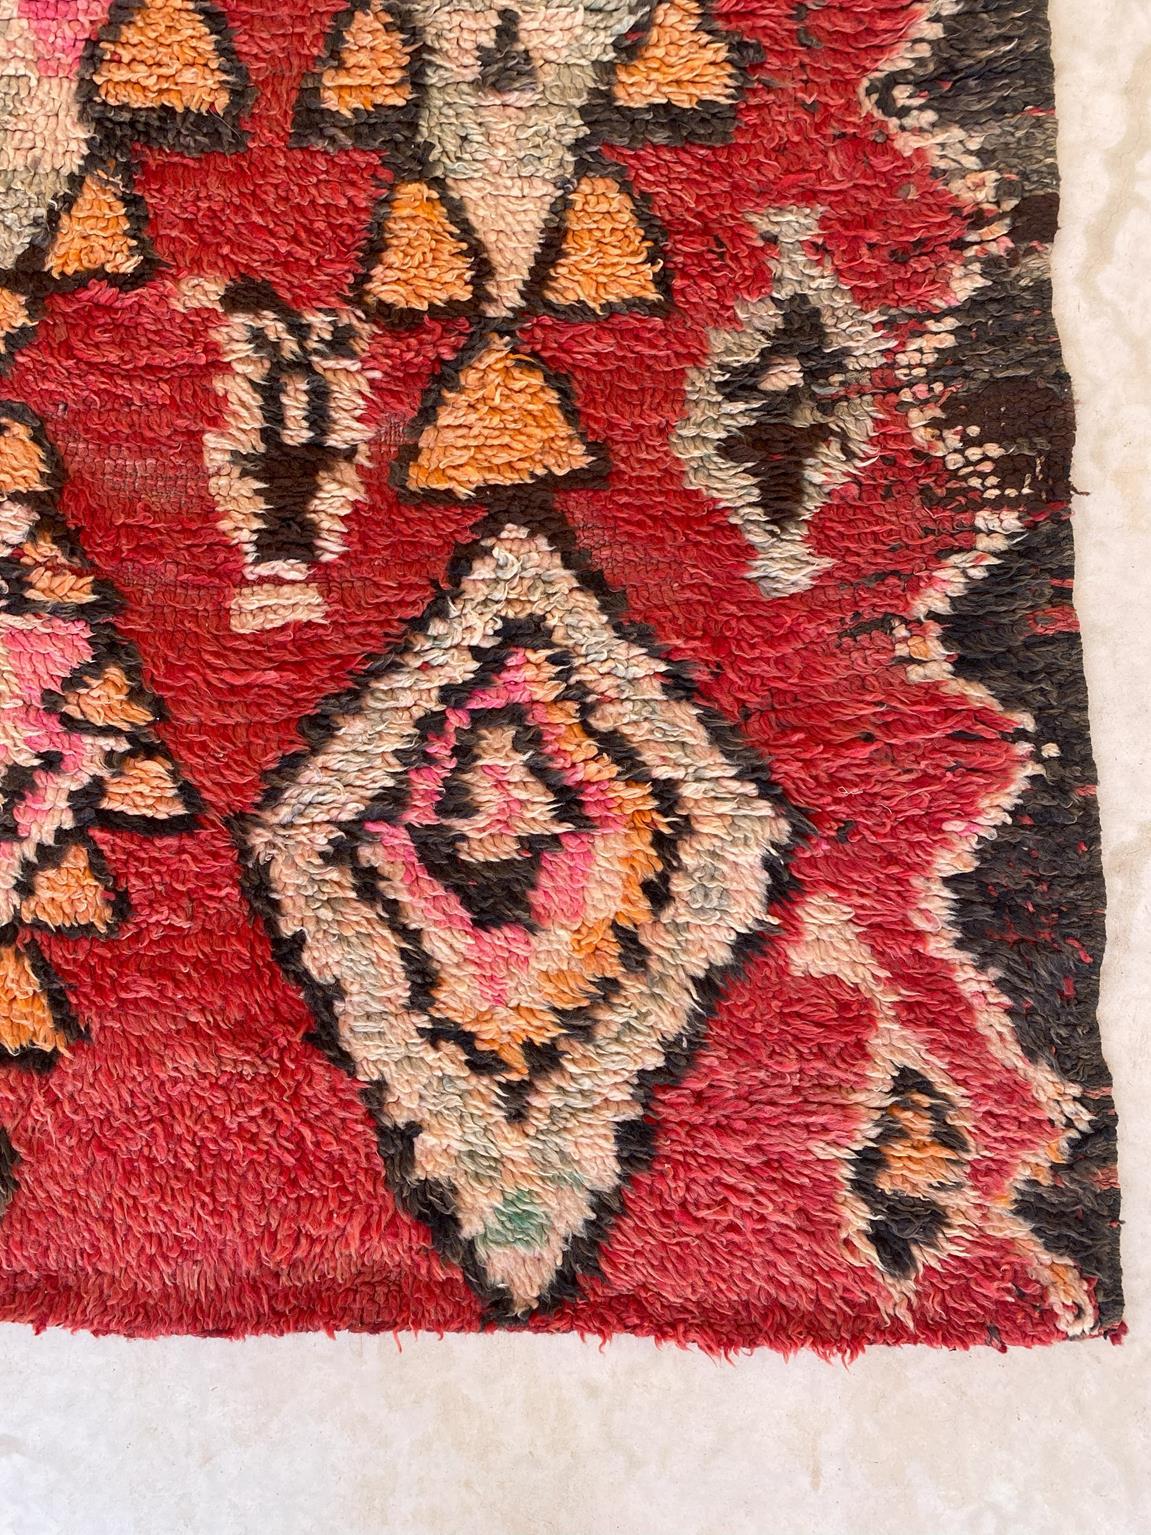 Vintage Moroccan Rehamna rug - Red/pink - 5.9x12.2feet / 180x373cm For Sale 6